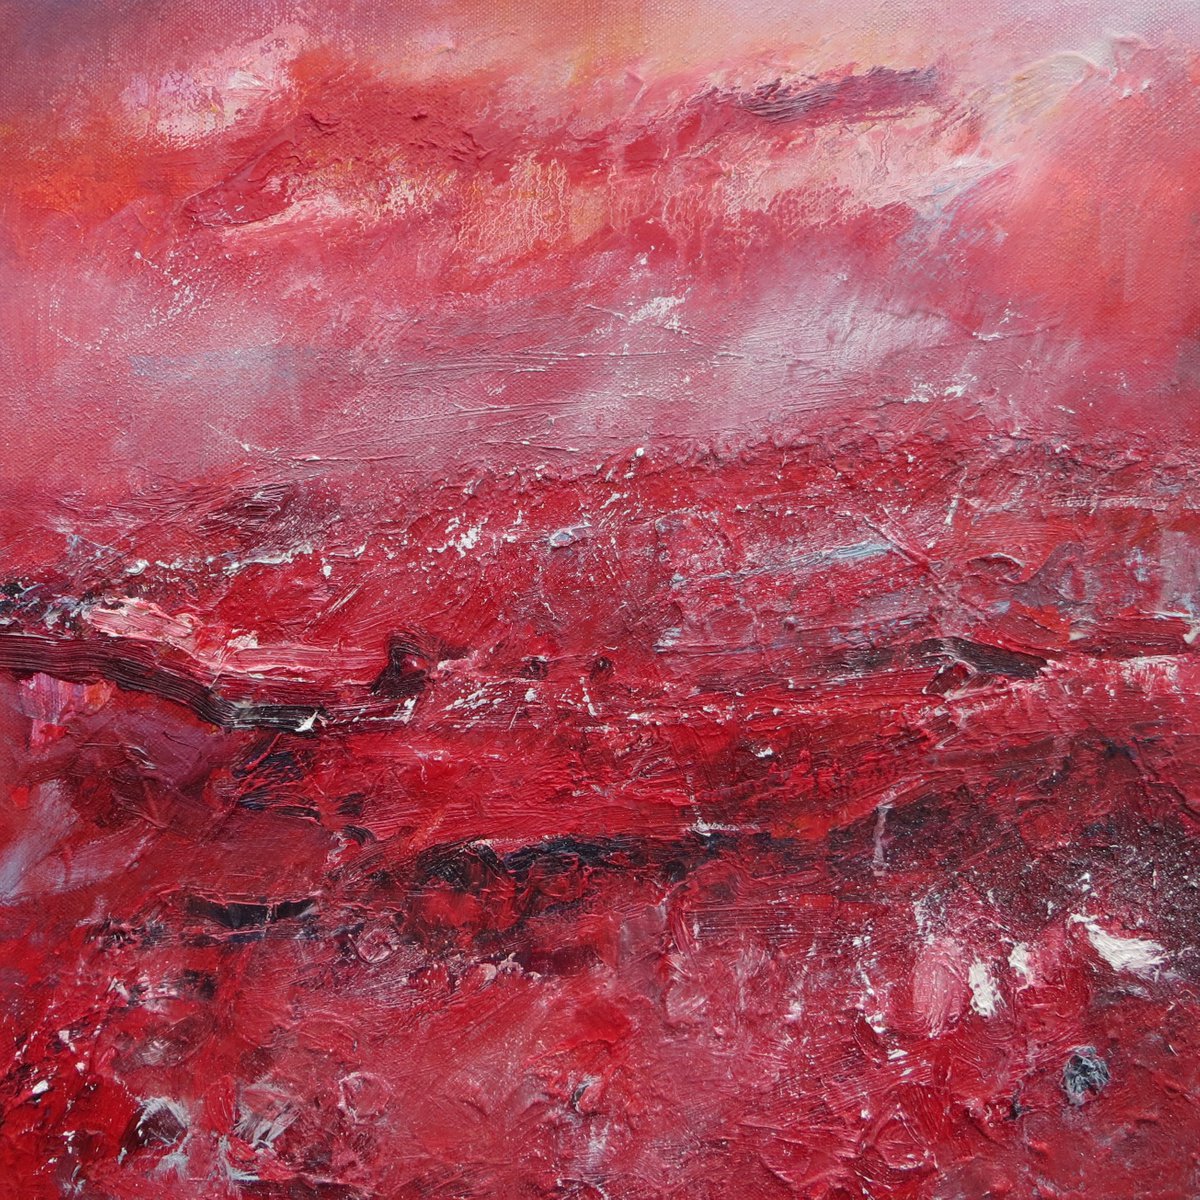 Landscape In Shades Of Red (The Colour Of Extremes) - Original Irish landscape painting in... by Martina Furlong